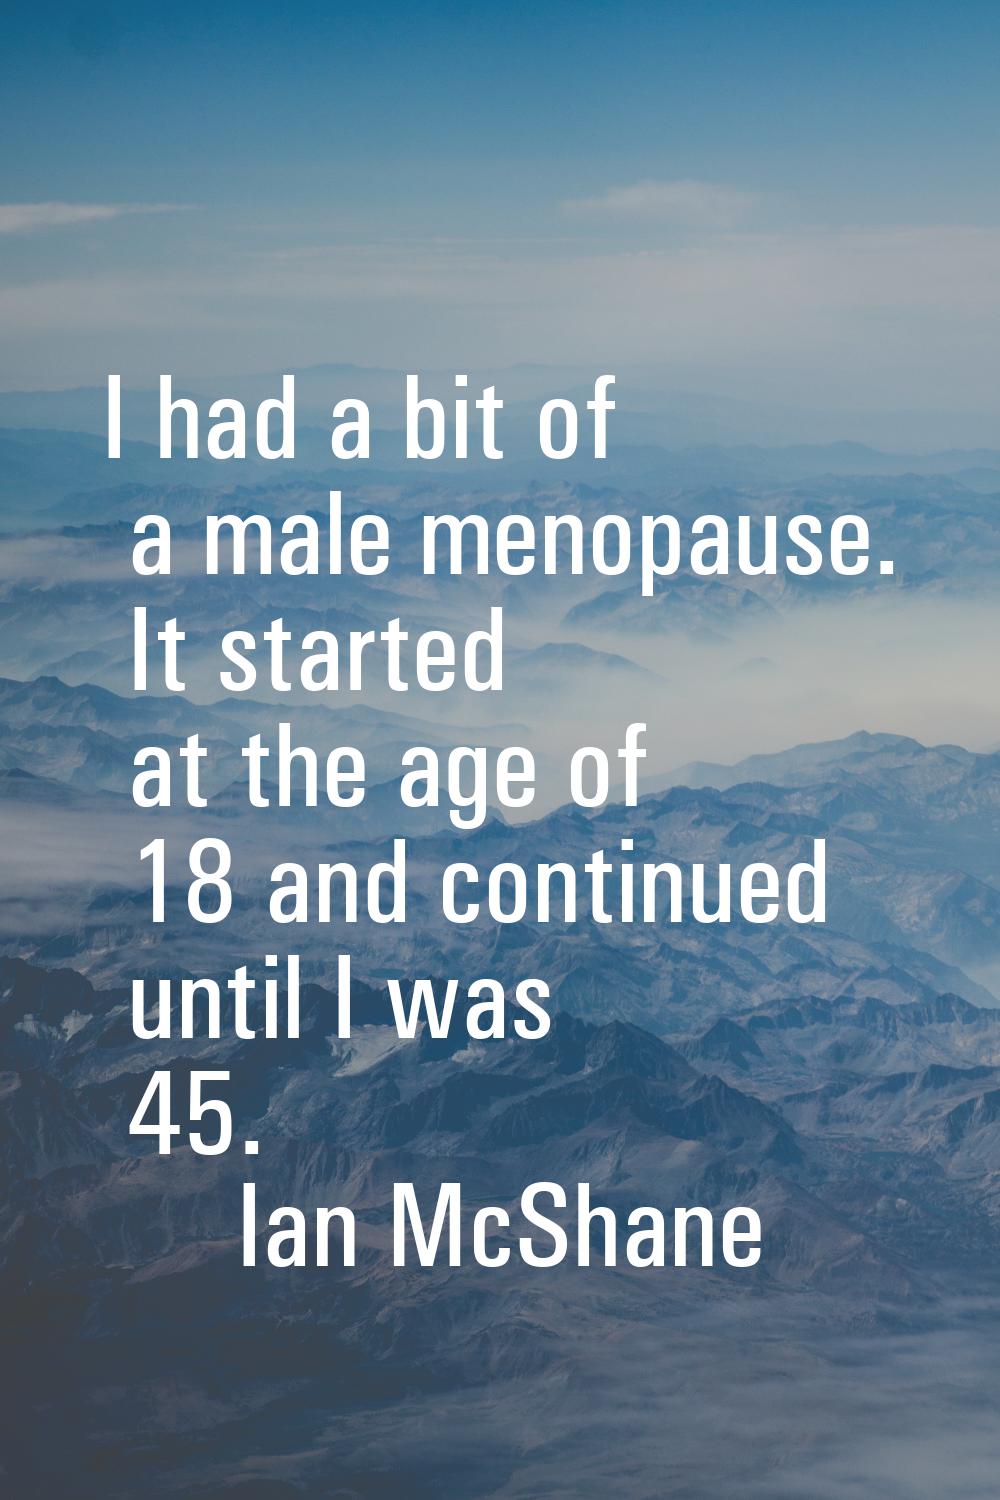 I had a bit of a male menopause. It started at the age of 18 and continued until I was 45.